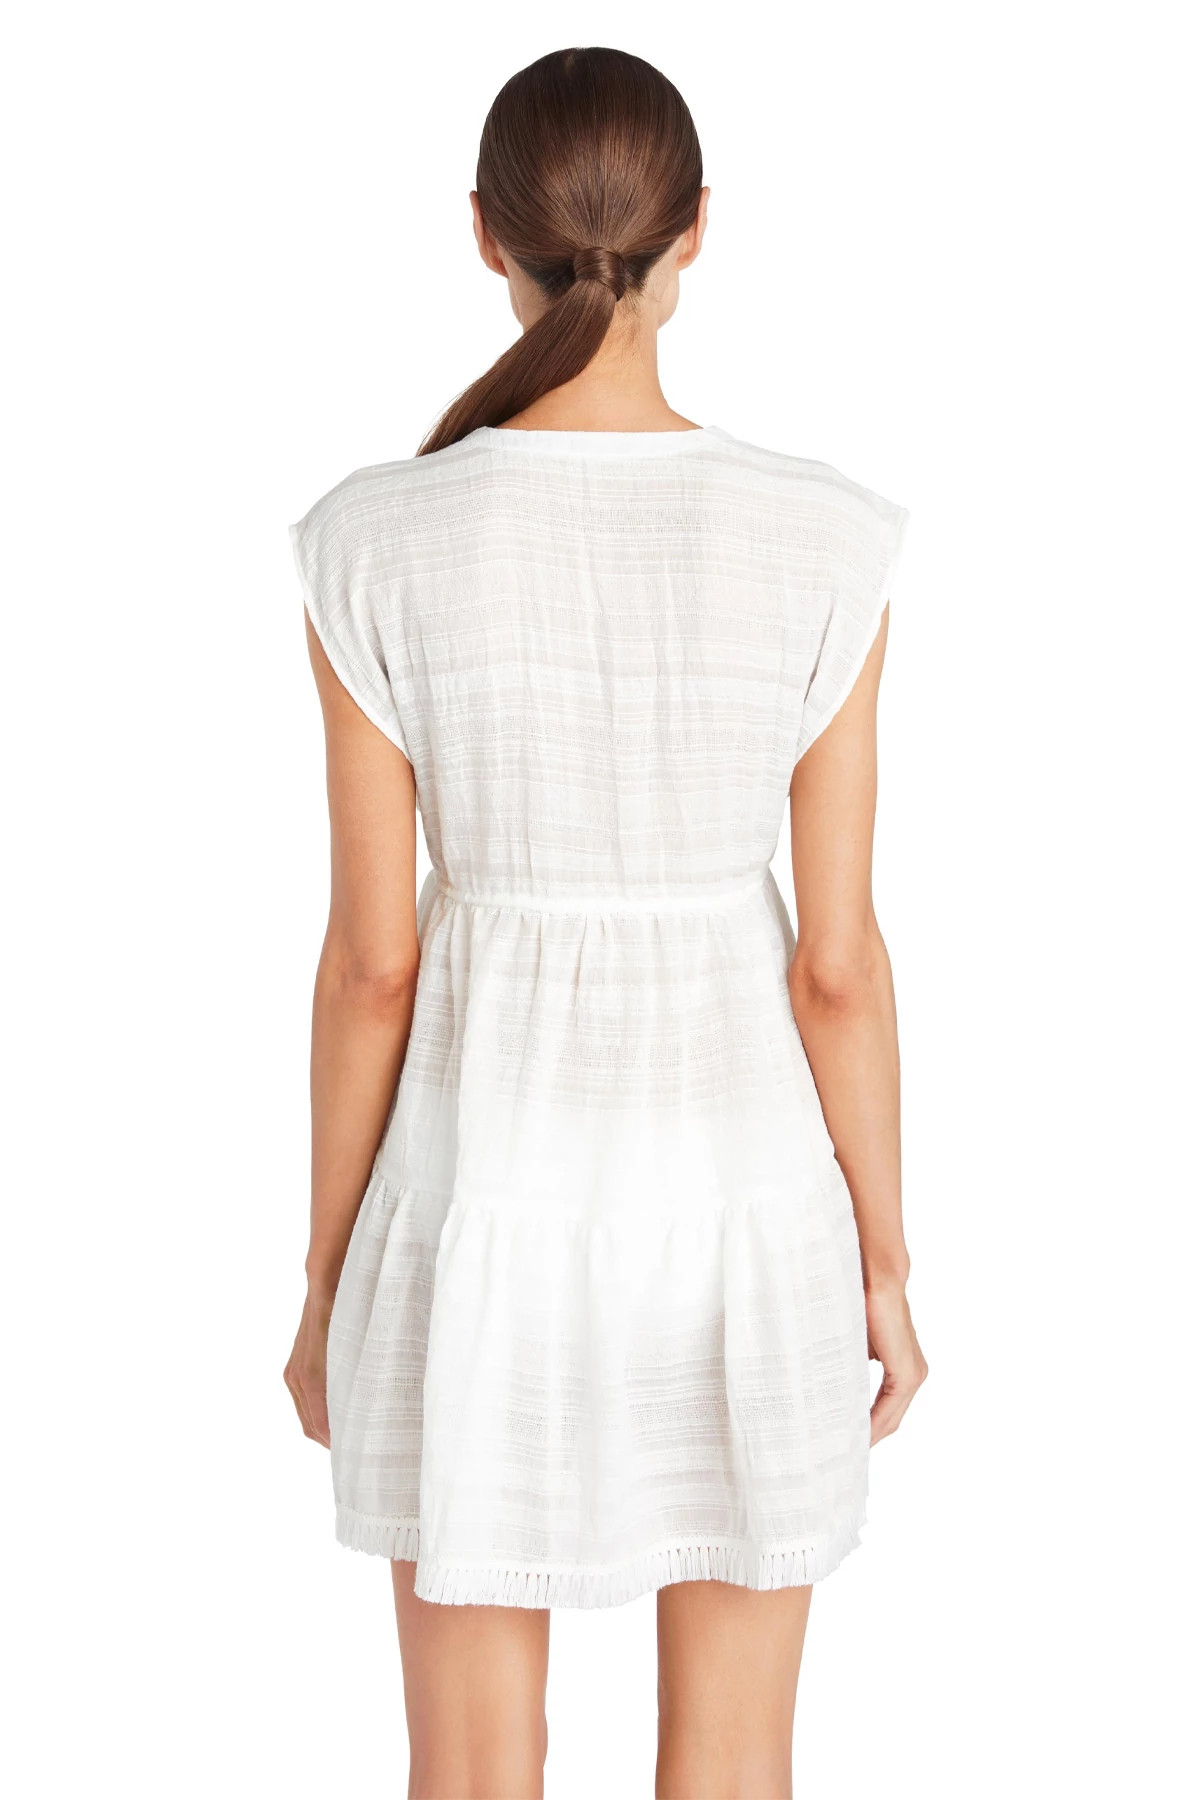 WHITE Natalie Flouncy Tunic image number 2